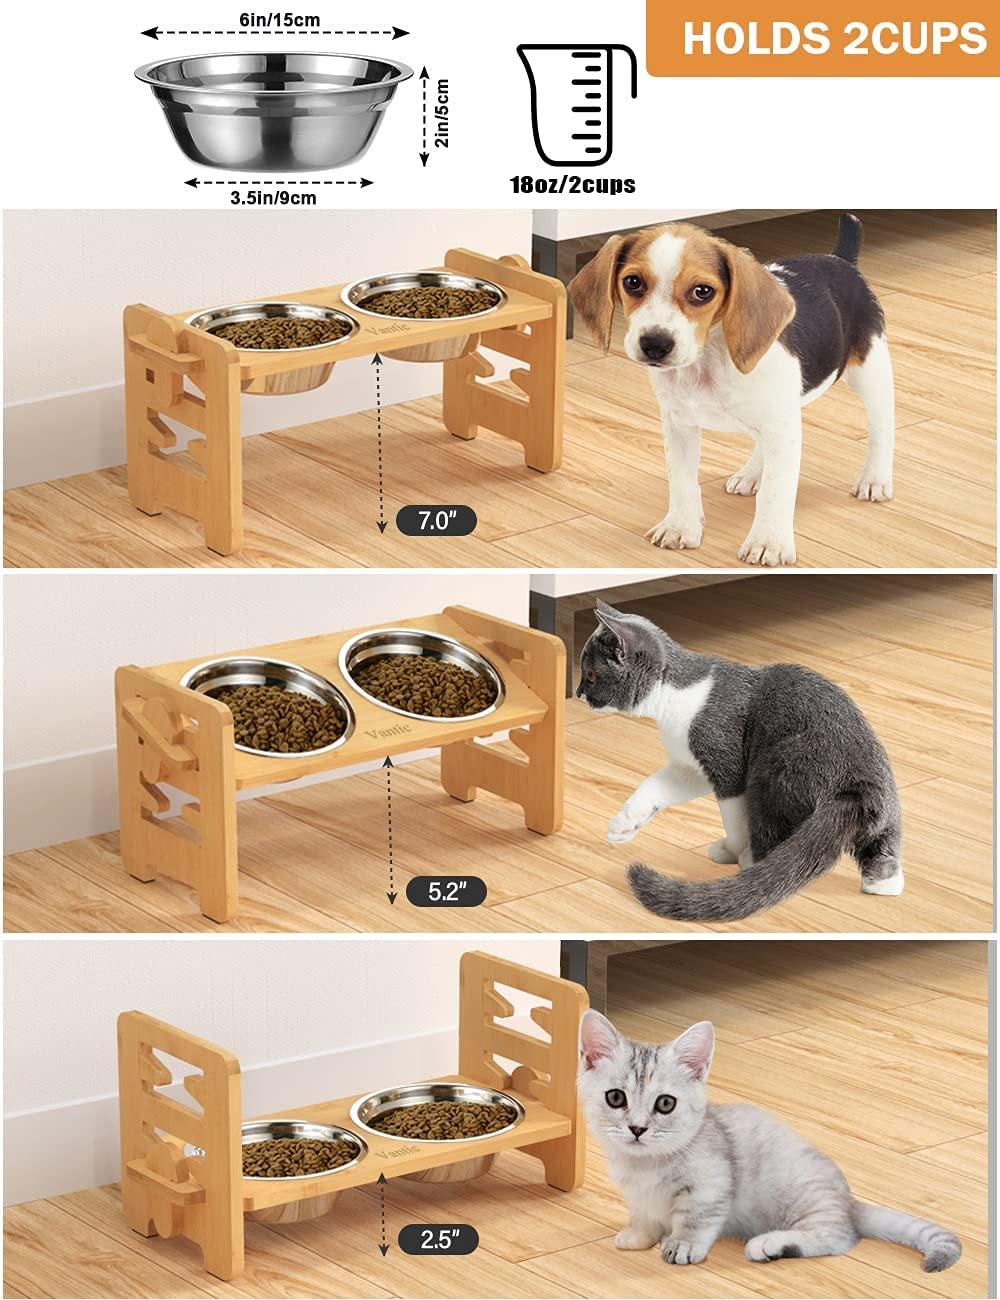 Adjustable Raised Dog Bowl for Small Dogs and Cats Durable Bamboo